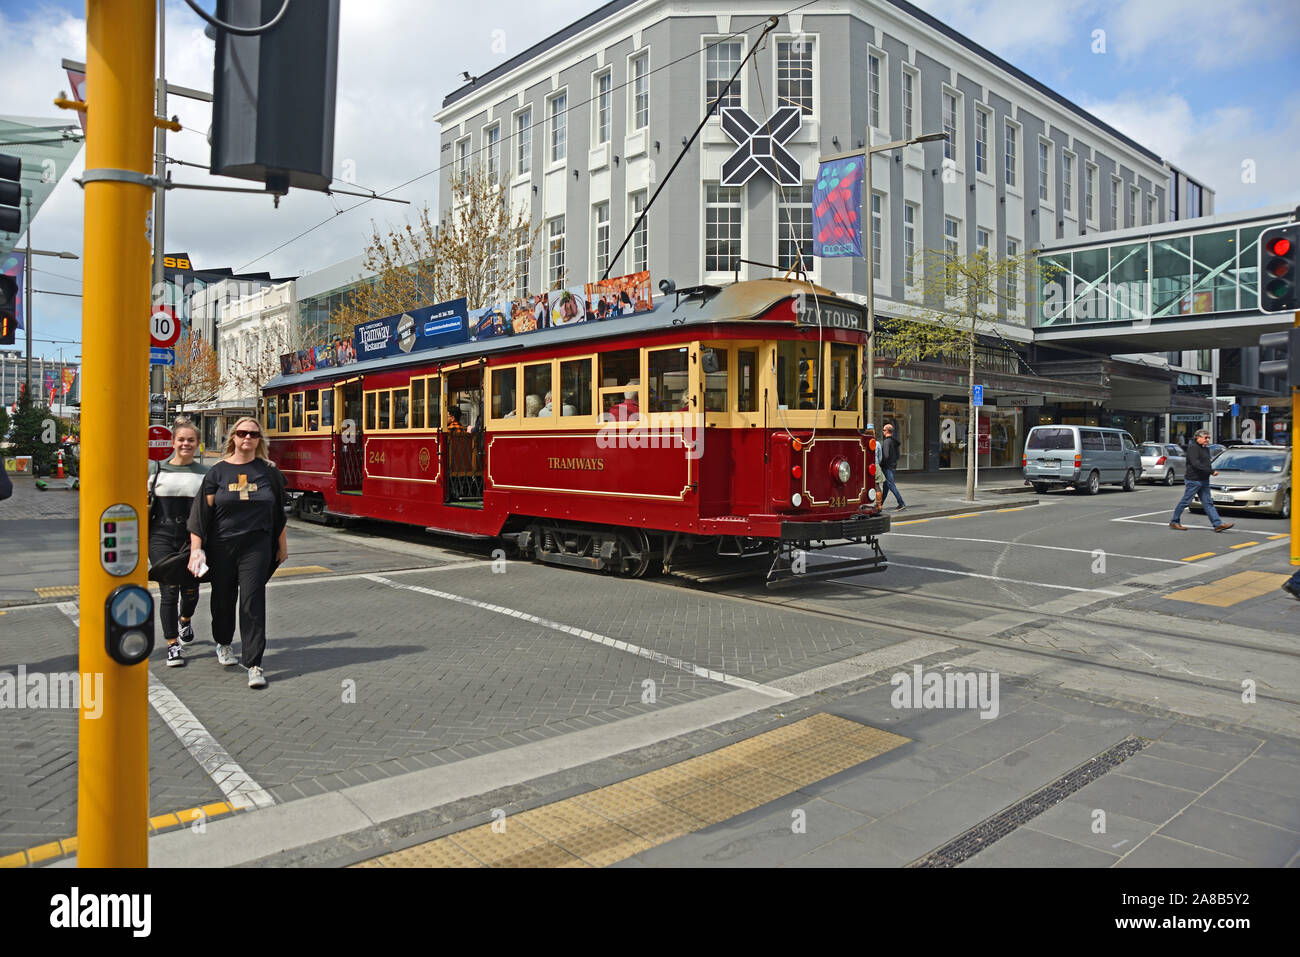 CHRISTCHURCH, NEW ZEALAND, OCTOBER 12, 2019: People on the city tram tour downtown Christchurch Stock Photo